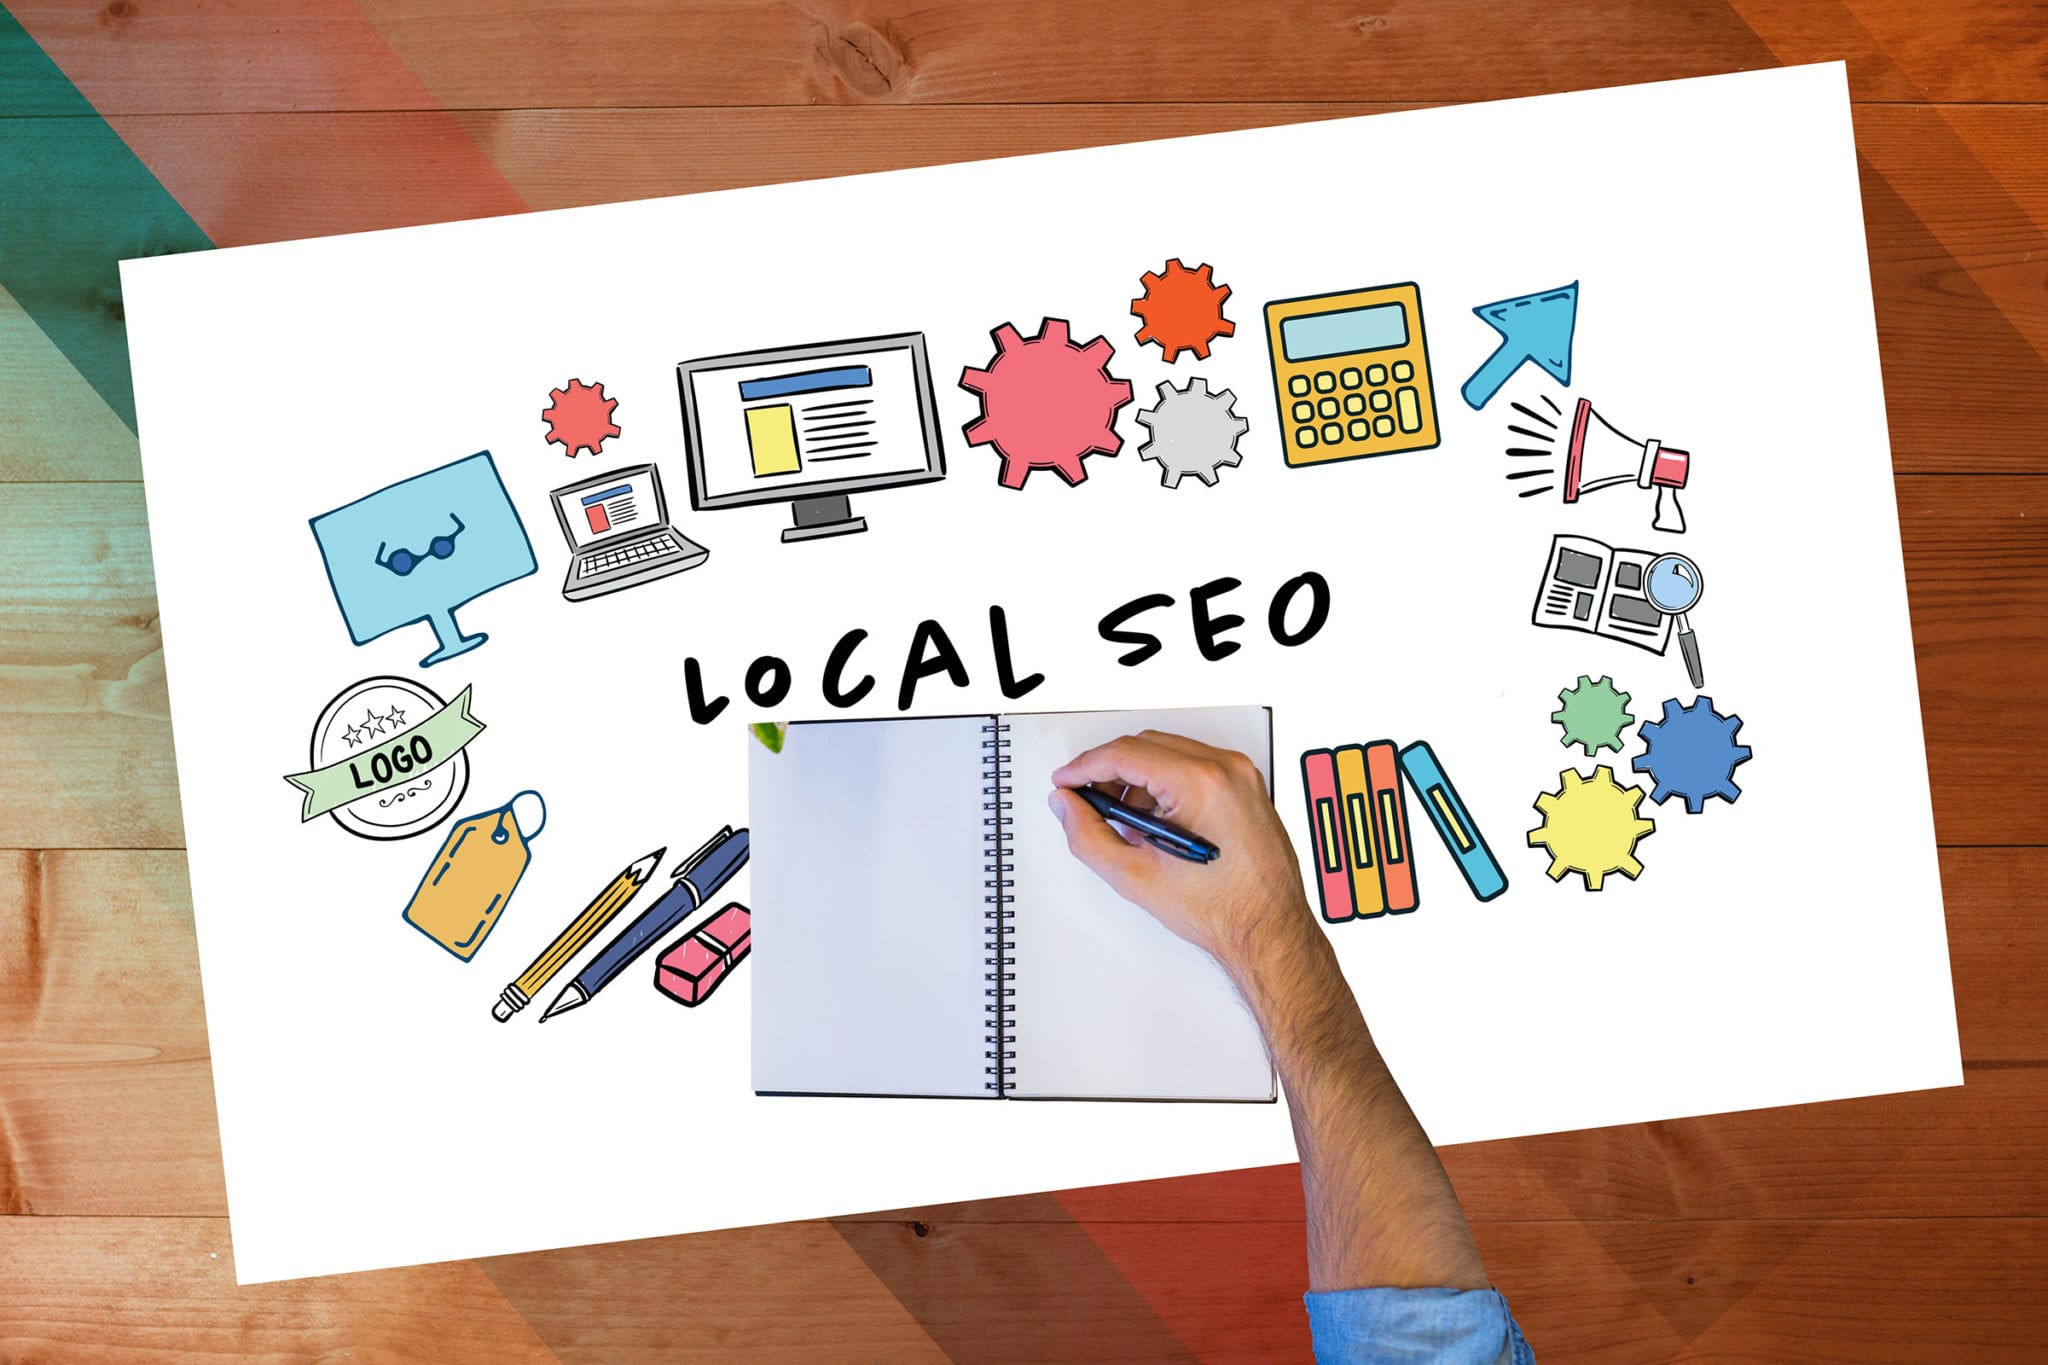 Local SEO Audit - Get In Touch With The People In Your Area